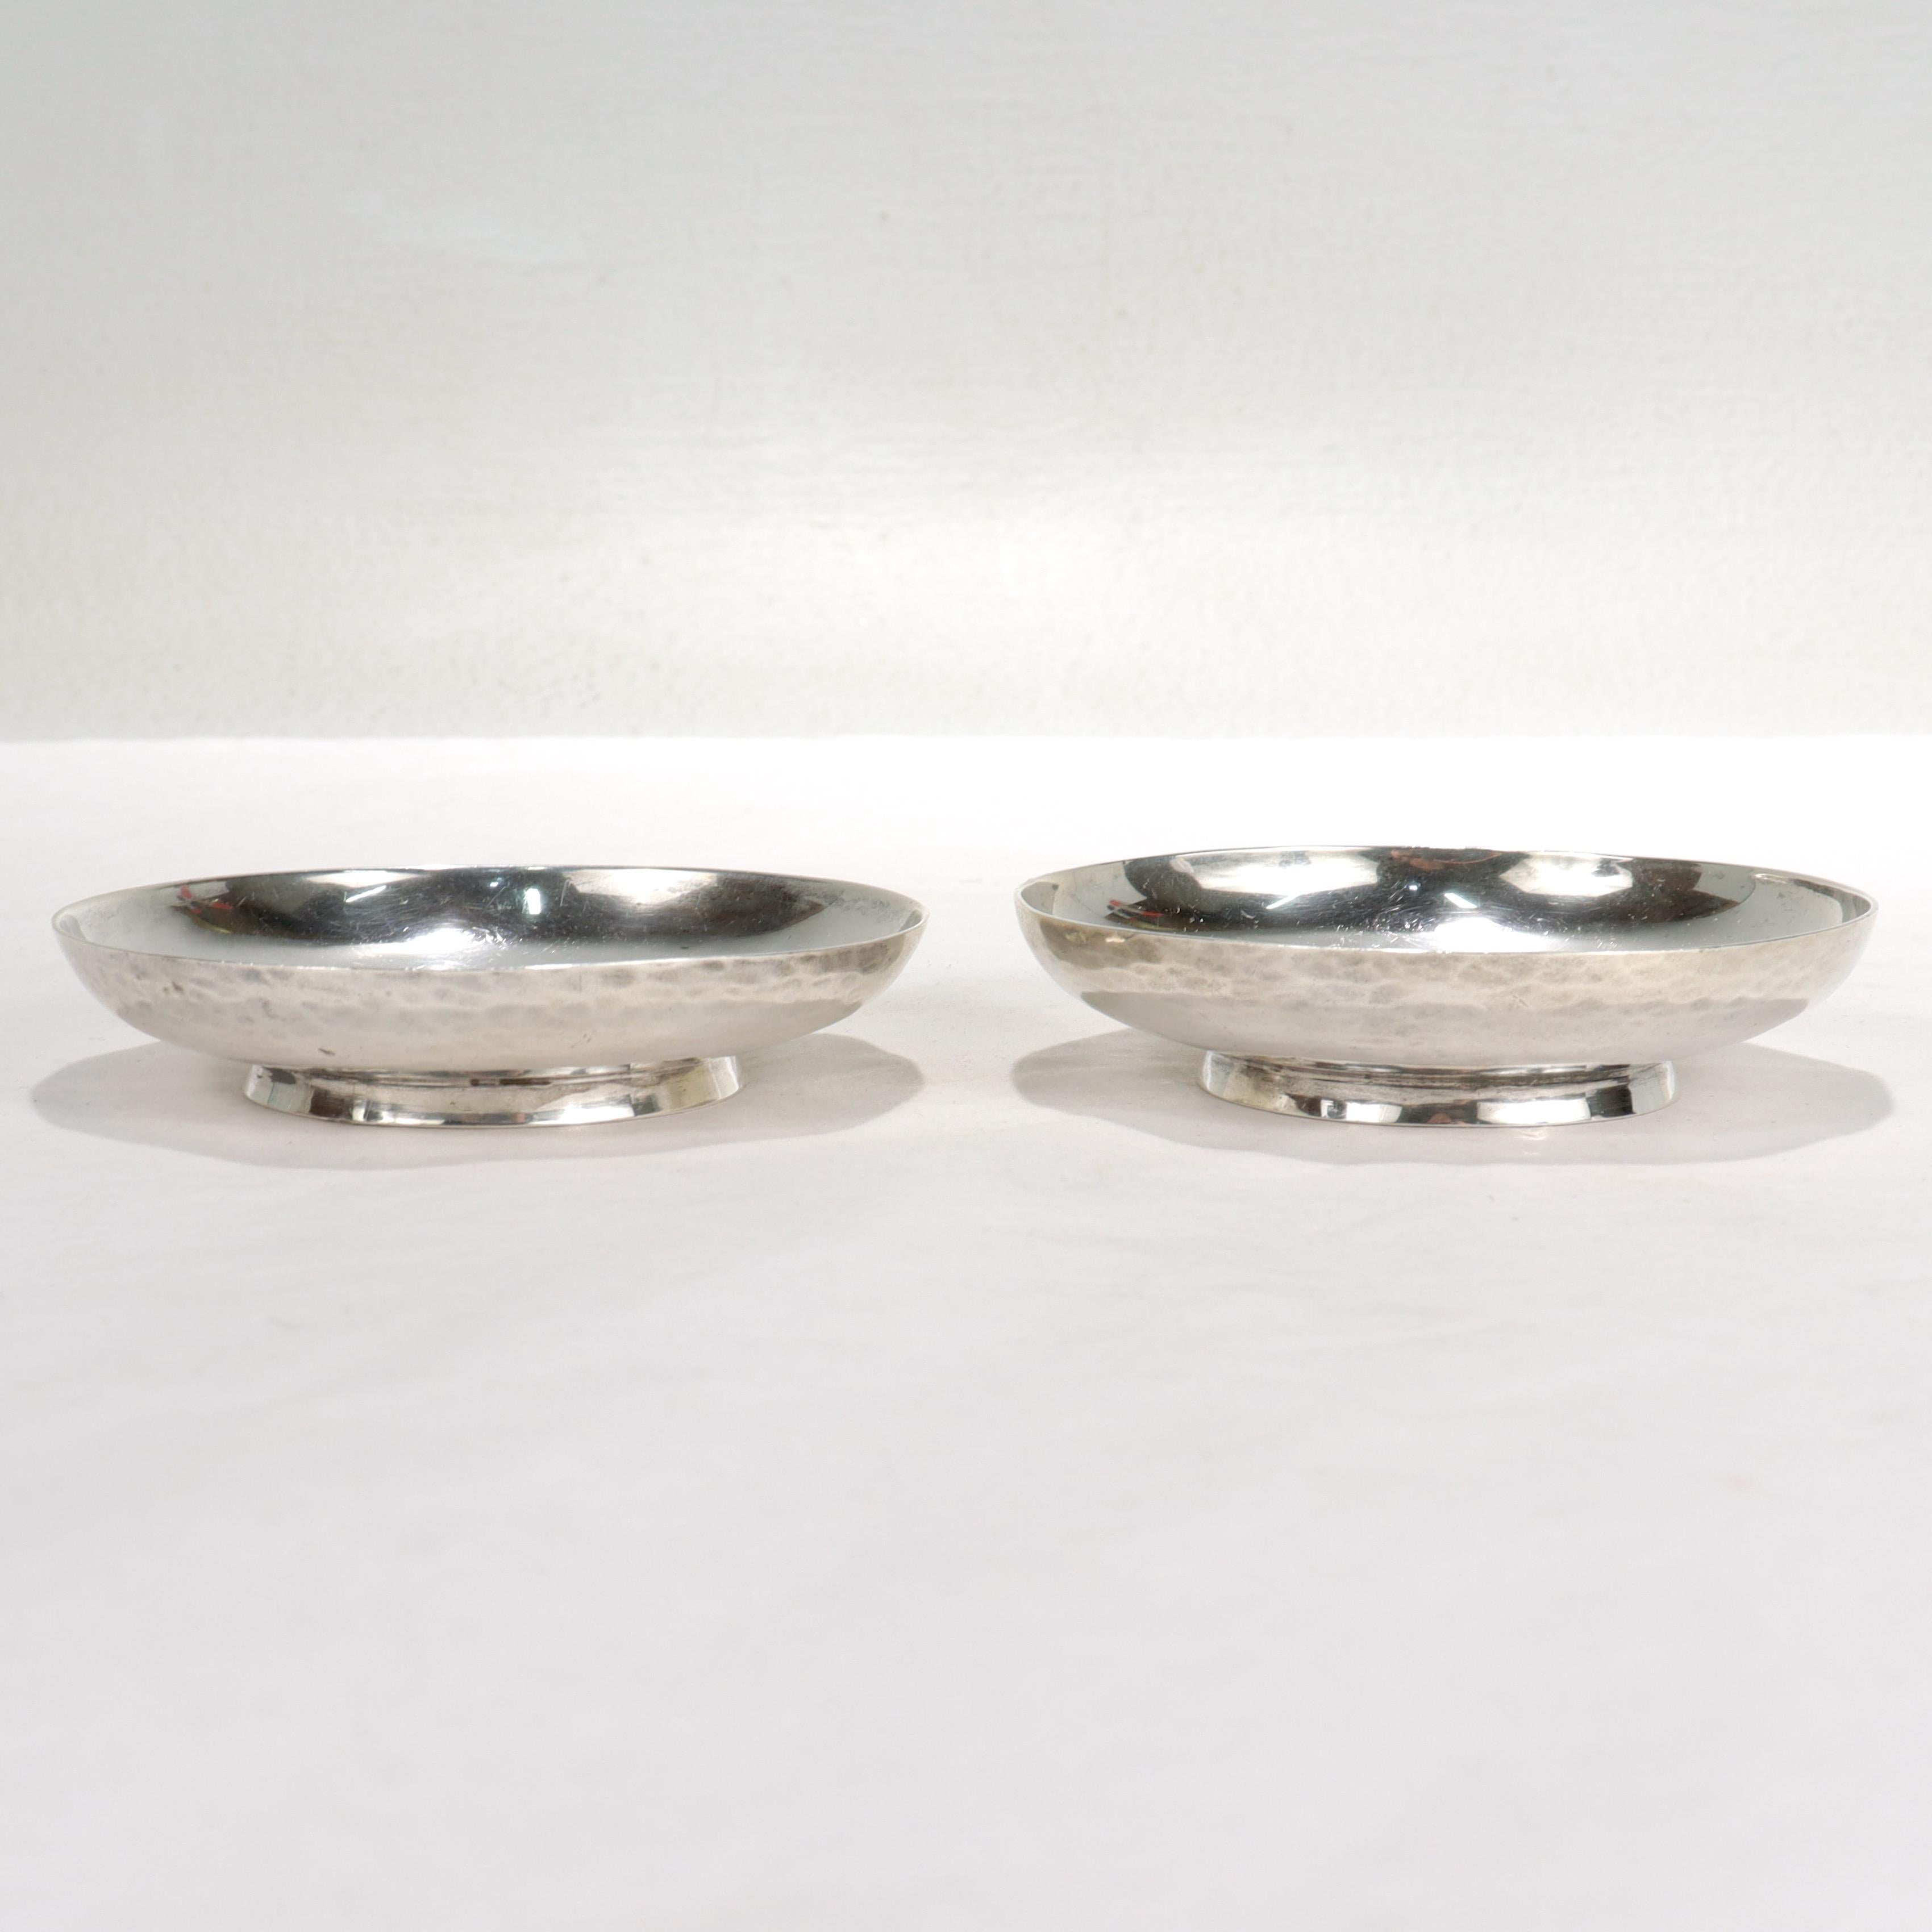 A fine pair of olive or nut dishes for the cocktail bar.

By Arthur Stone.

In hand-hammered sterling silver.

Each hand-hammered bowl has a small flared foot and a 'berries & vine' etched decoration to its center. Curiously, the central decoration